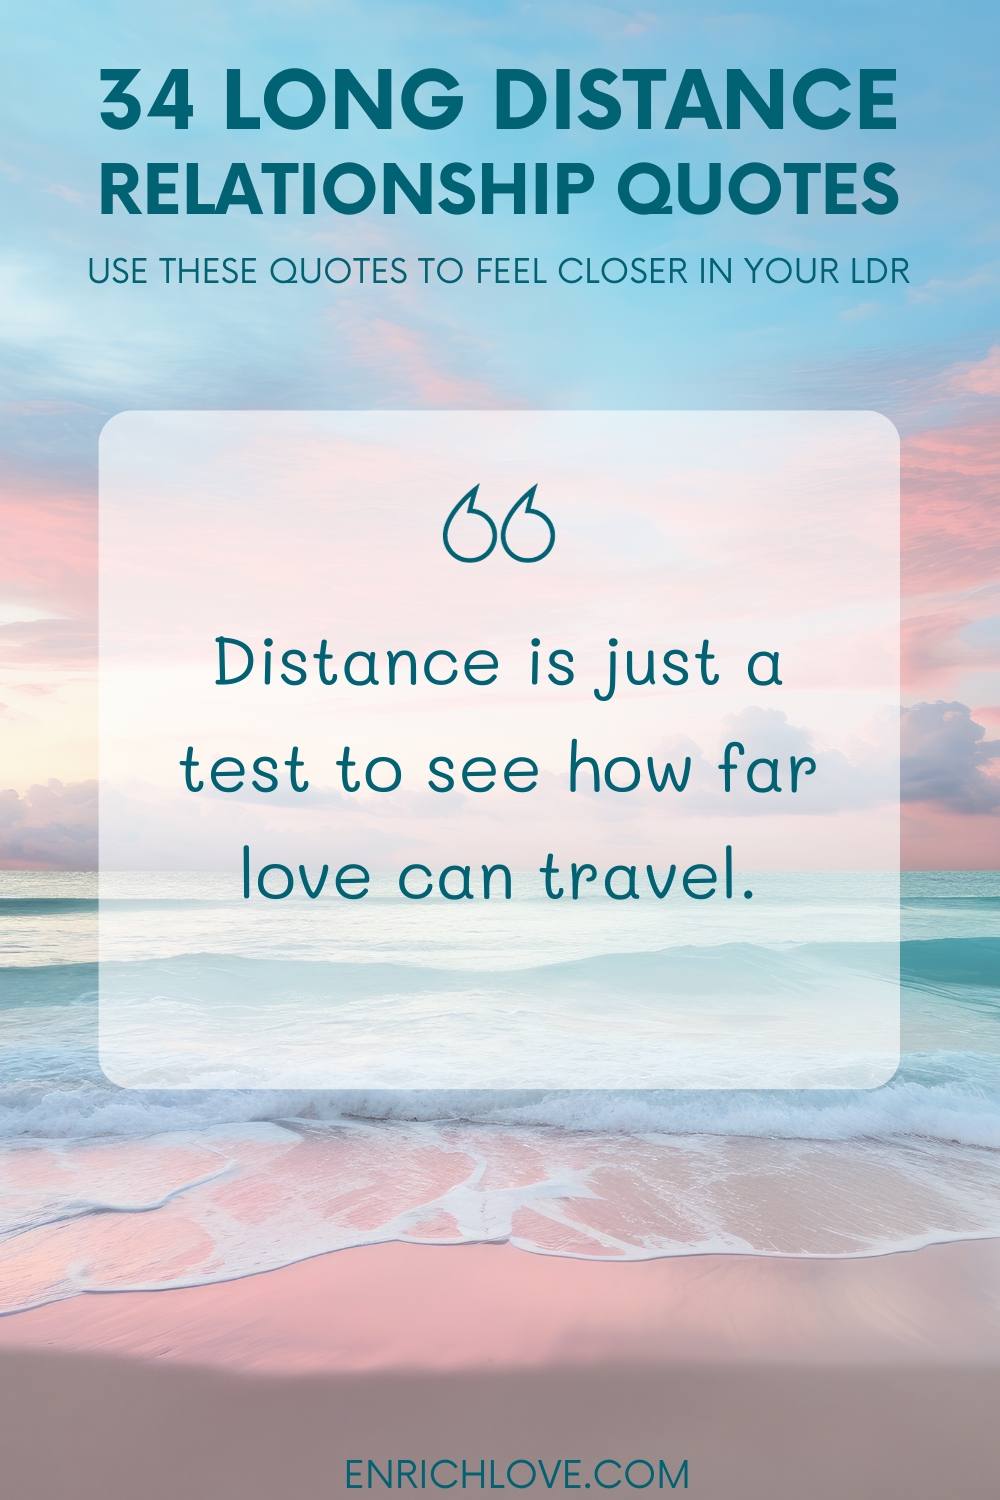 34 Long Distance Relationship Quotes - Distance is just a test to see how far love can travel.